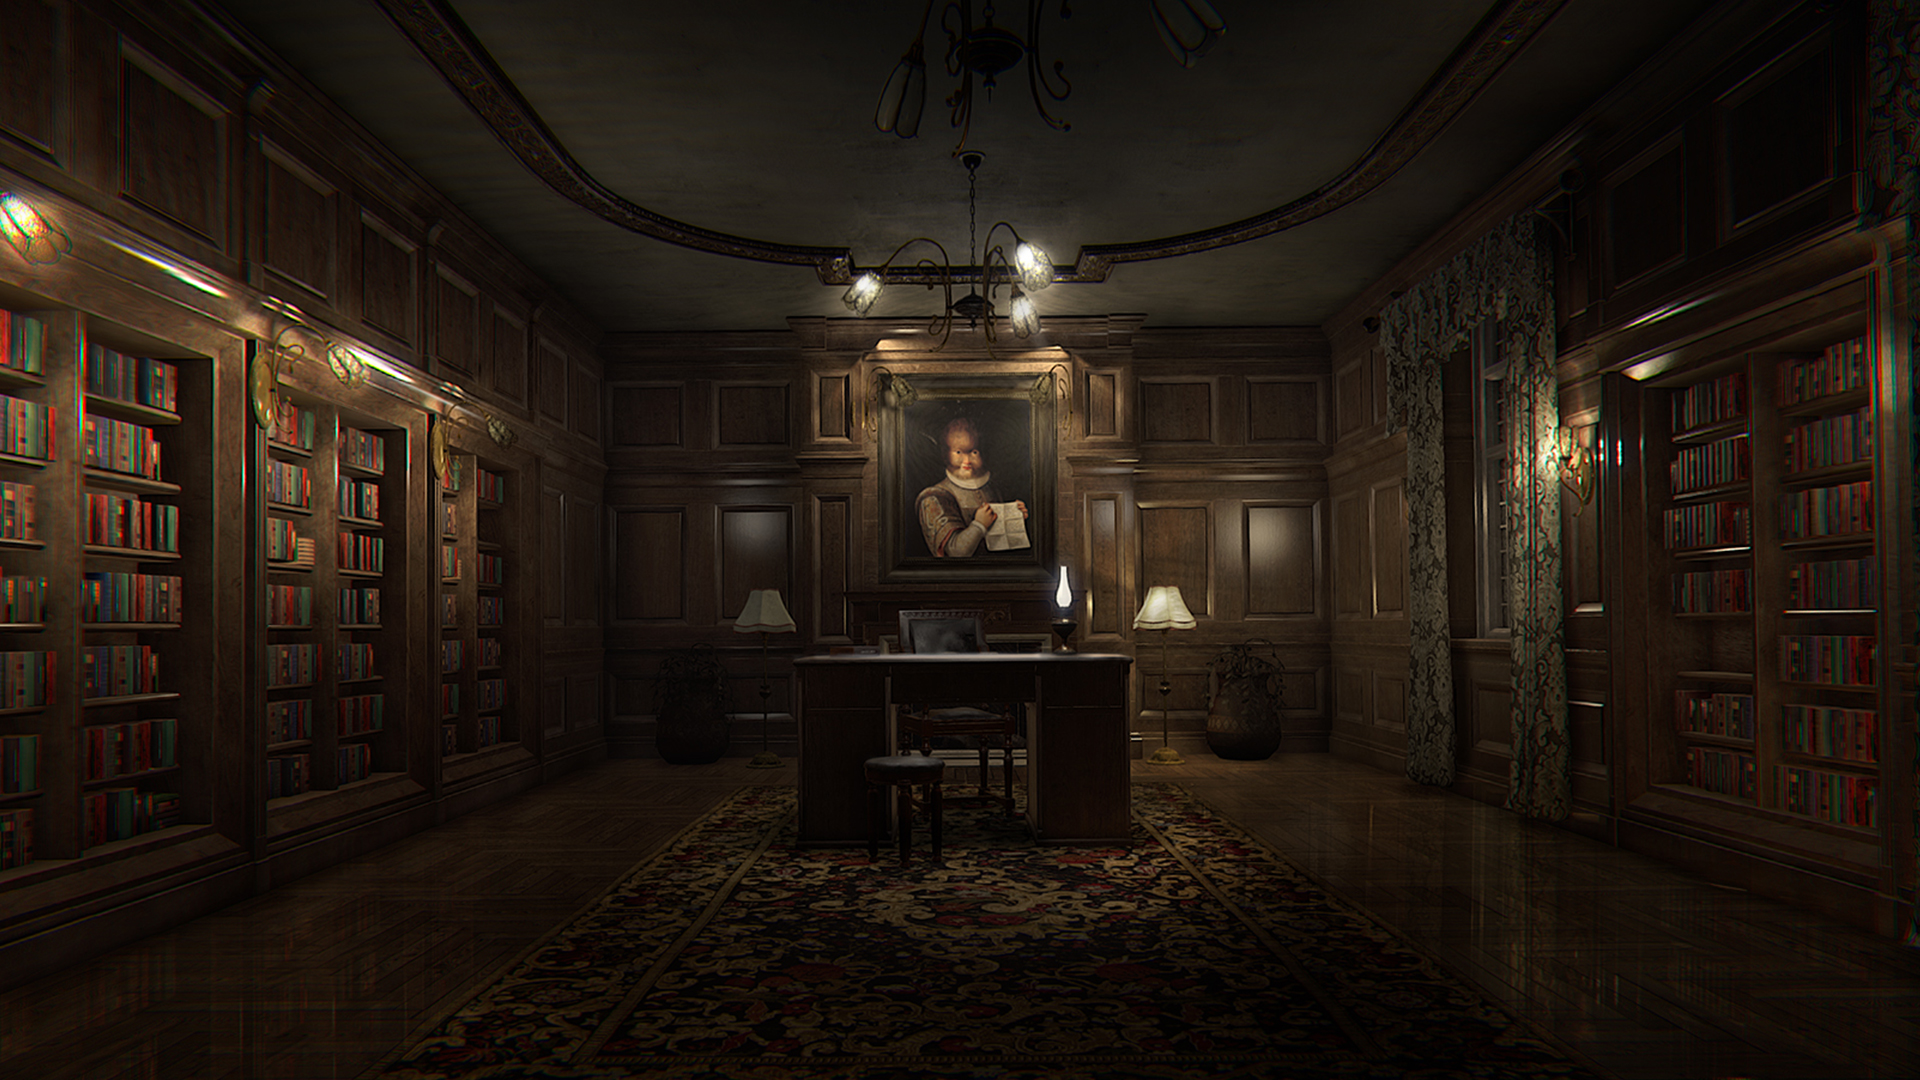 Layers of Fear Reviews for PC - GameFAQs